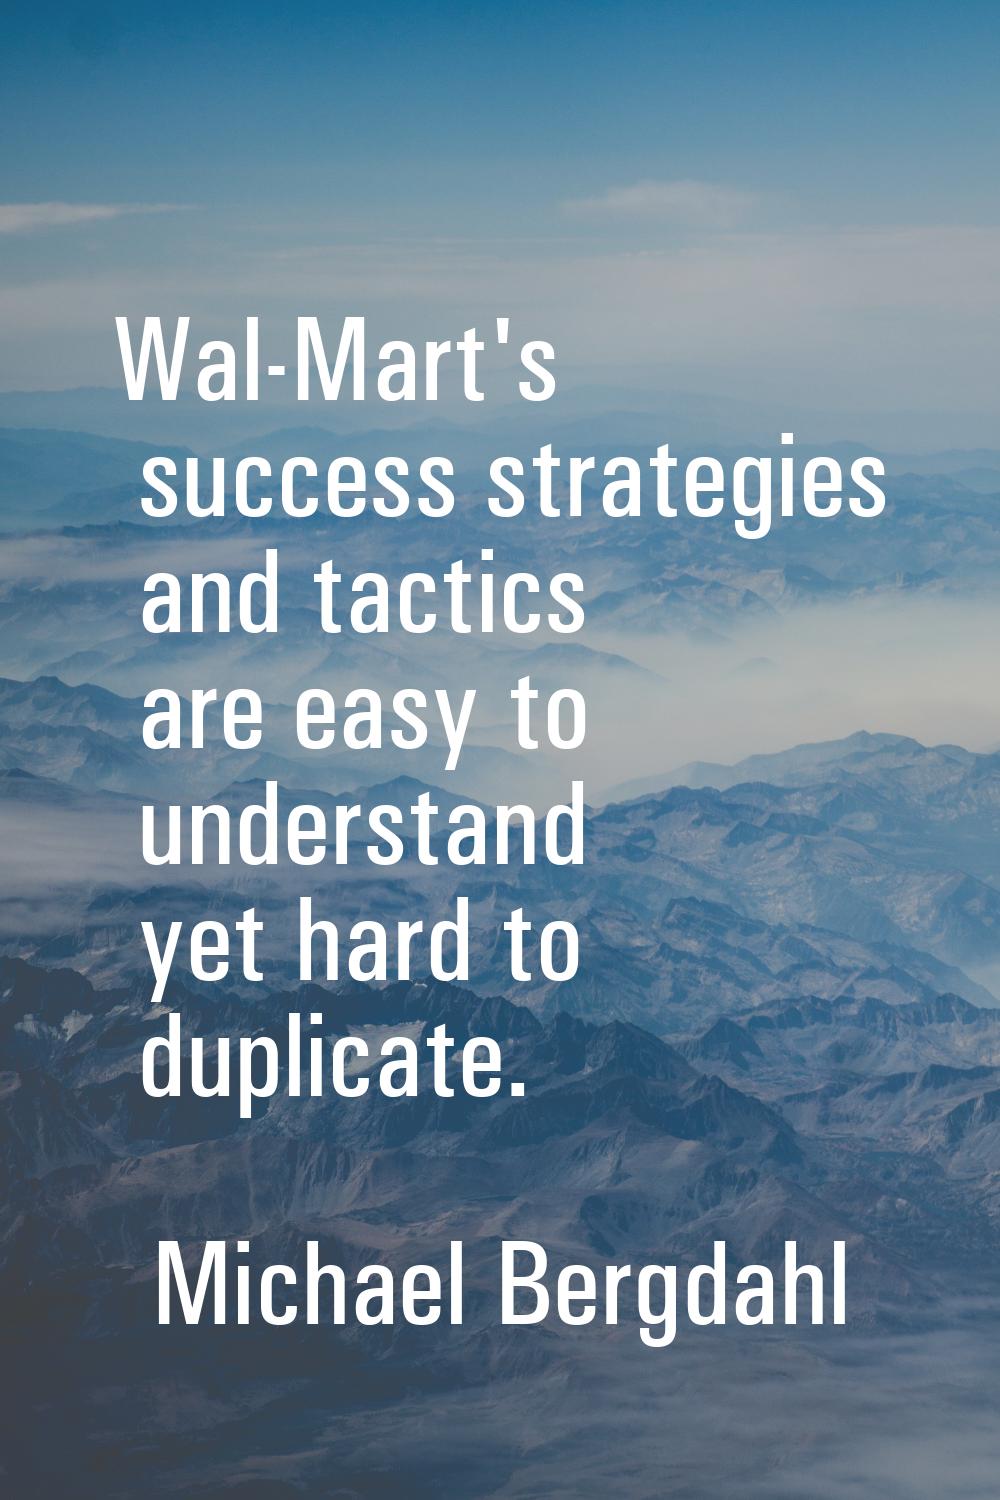 Wal-Mart's success strategies and tactics are easy to understand yet hard to duplicate.